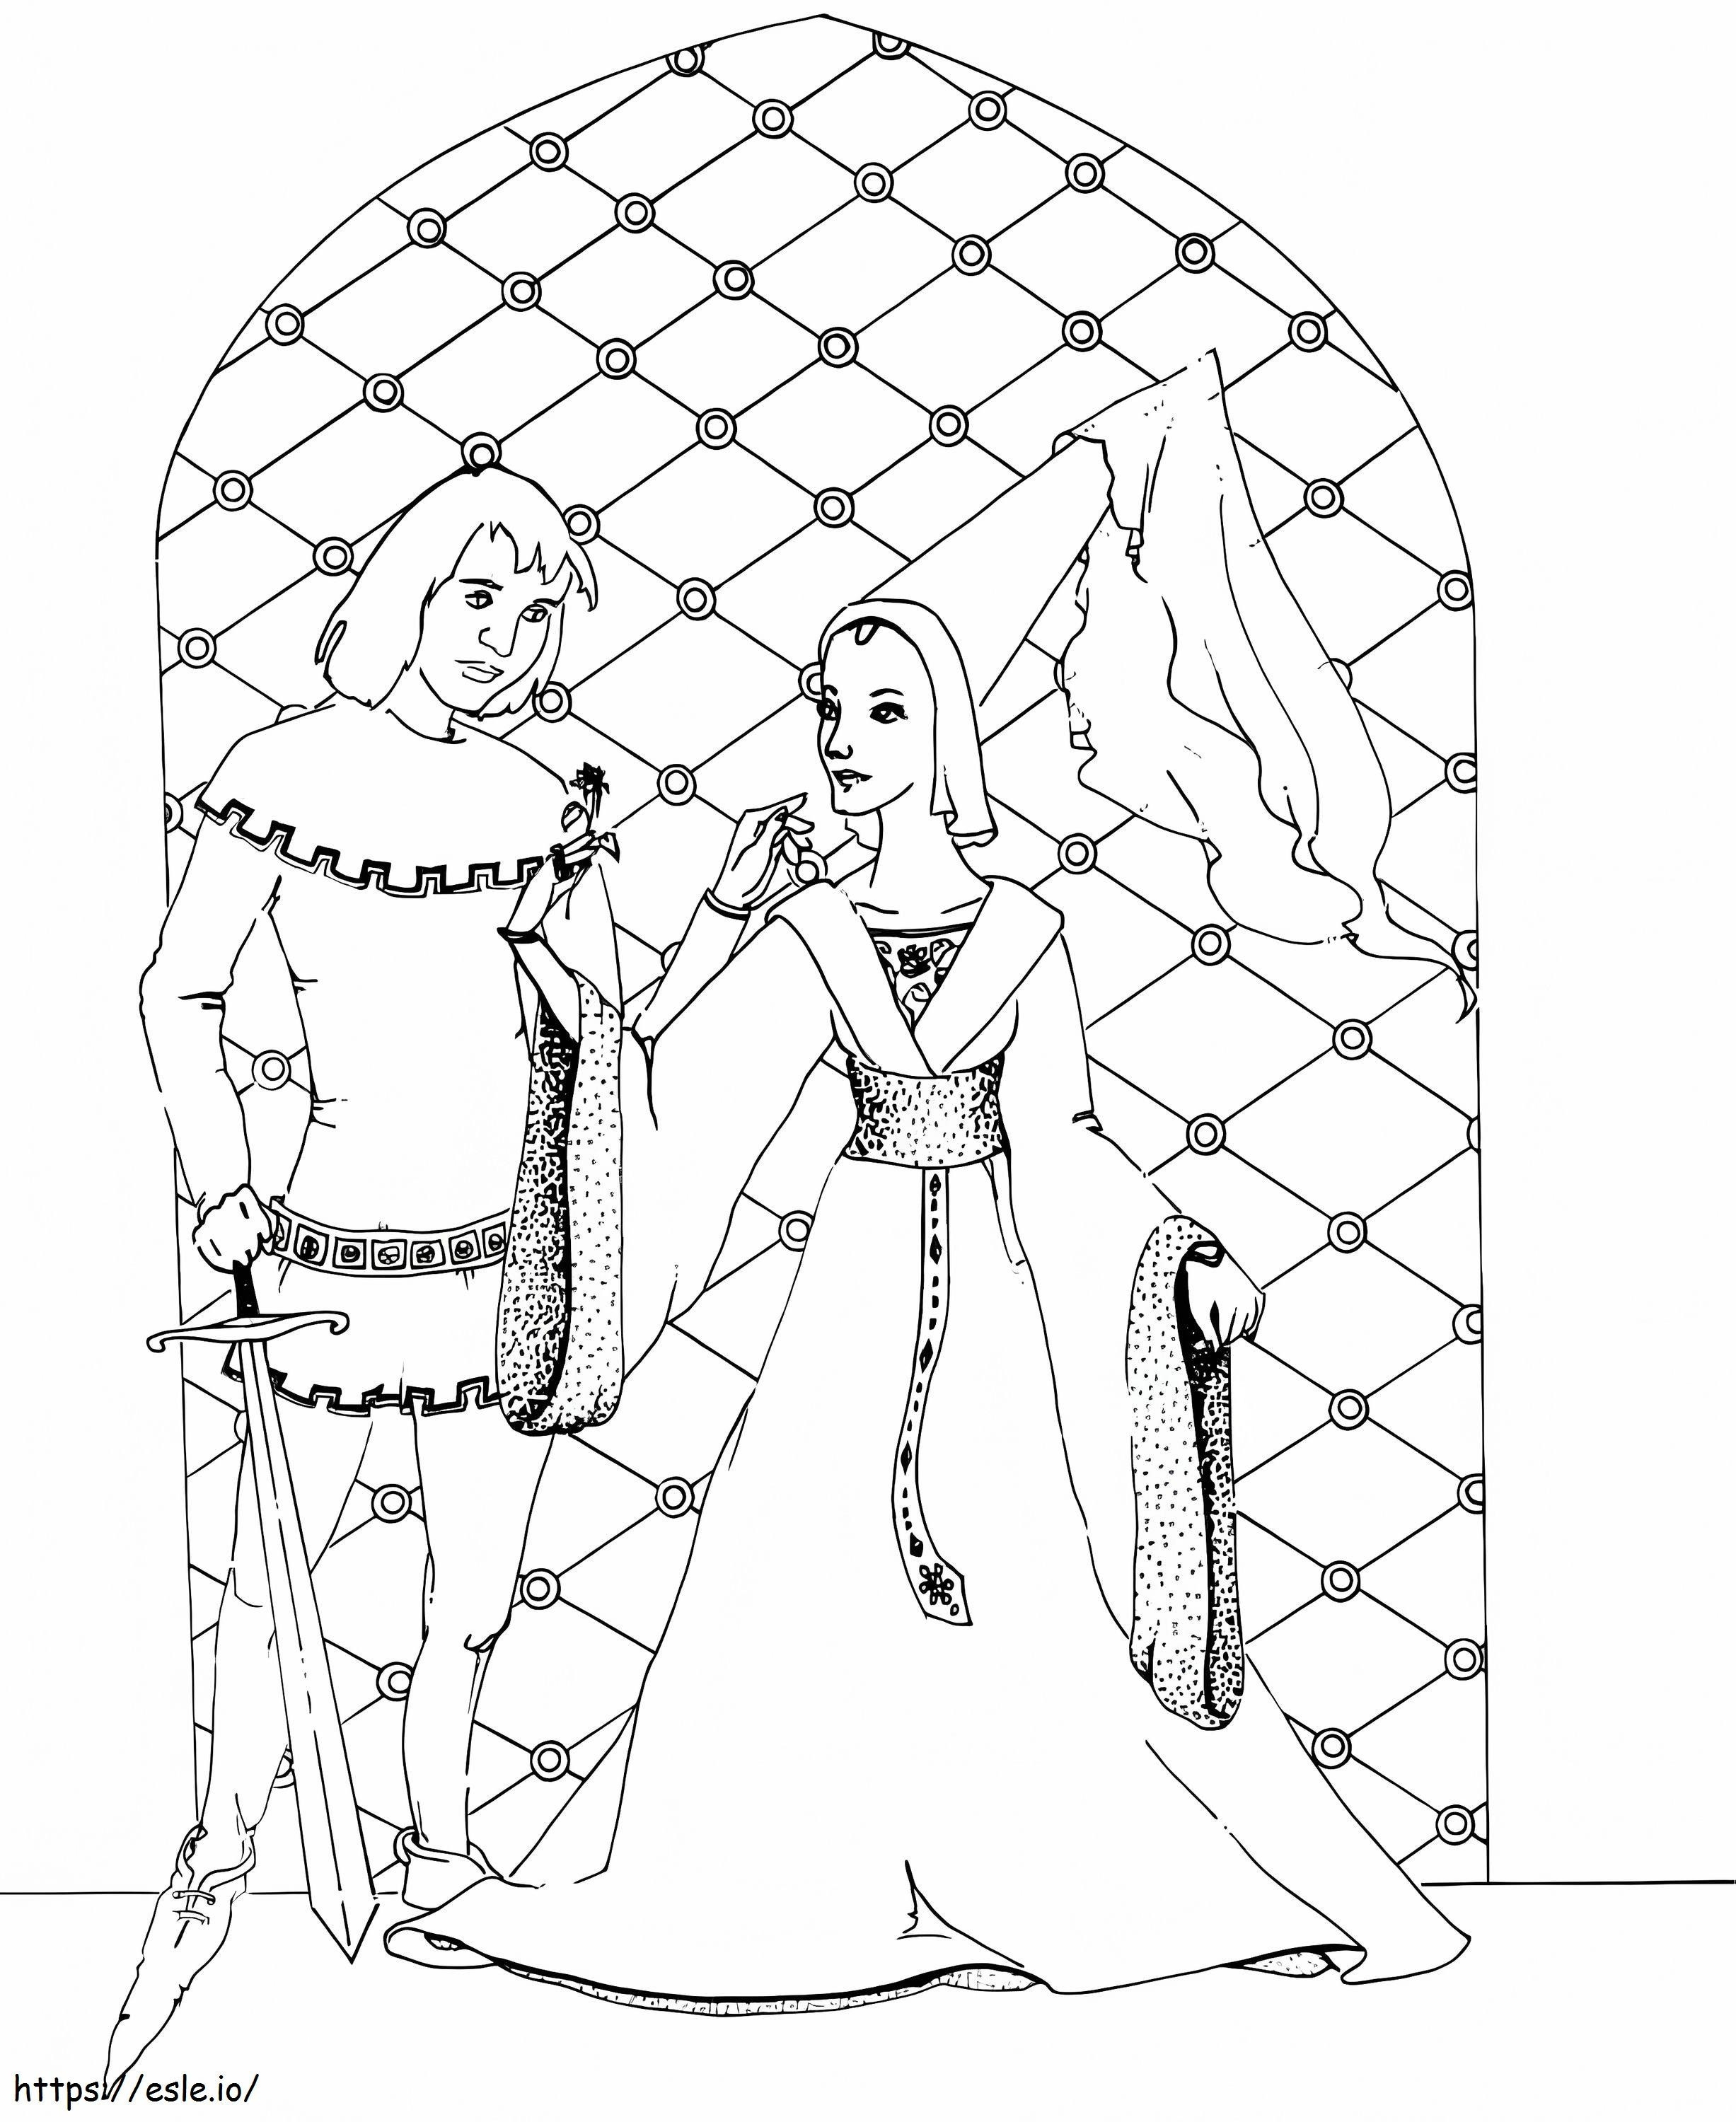 Knight And Princess coloring page